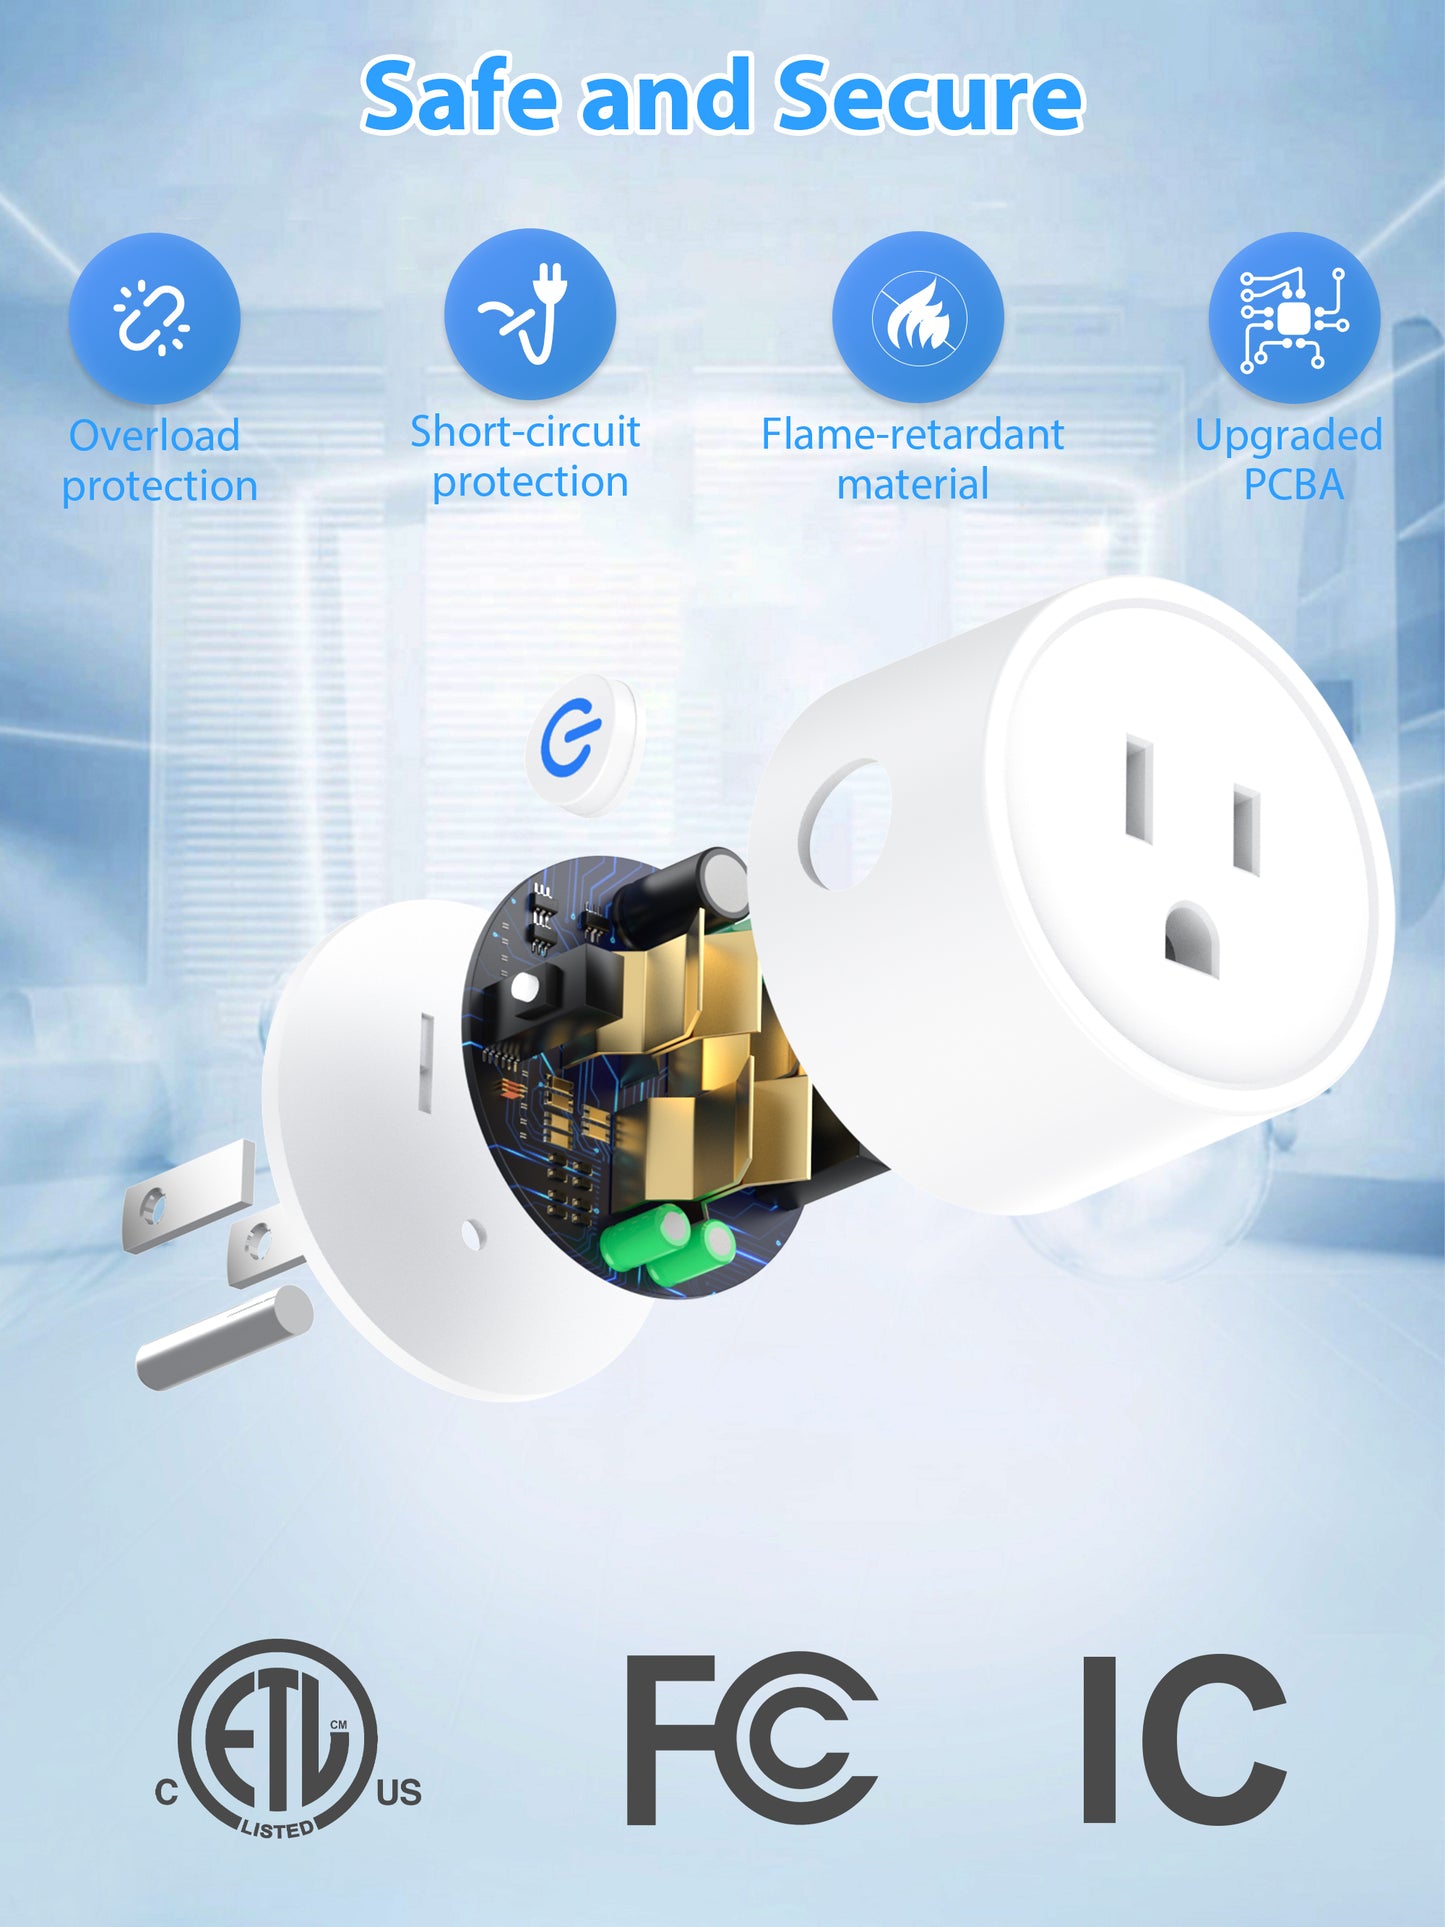 US Smart Plug That Work with Smart Life App ET01A – Eightree Club